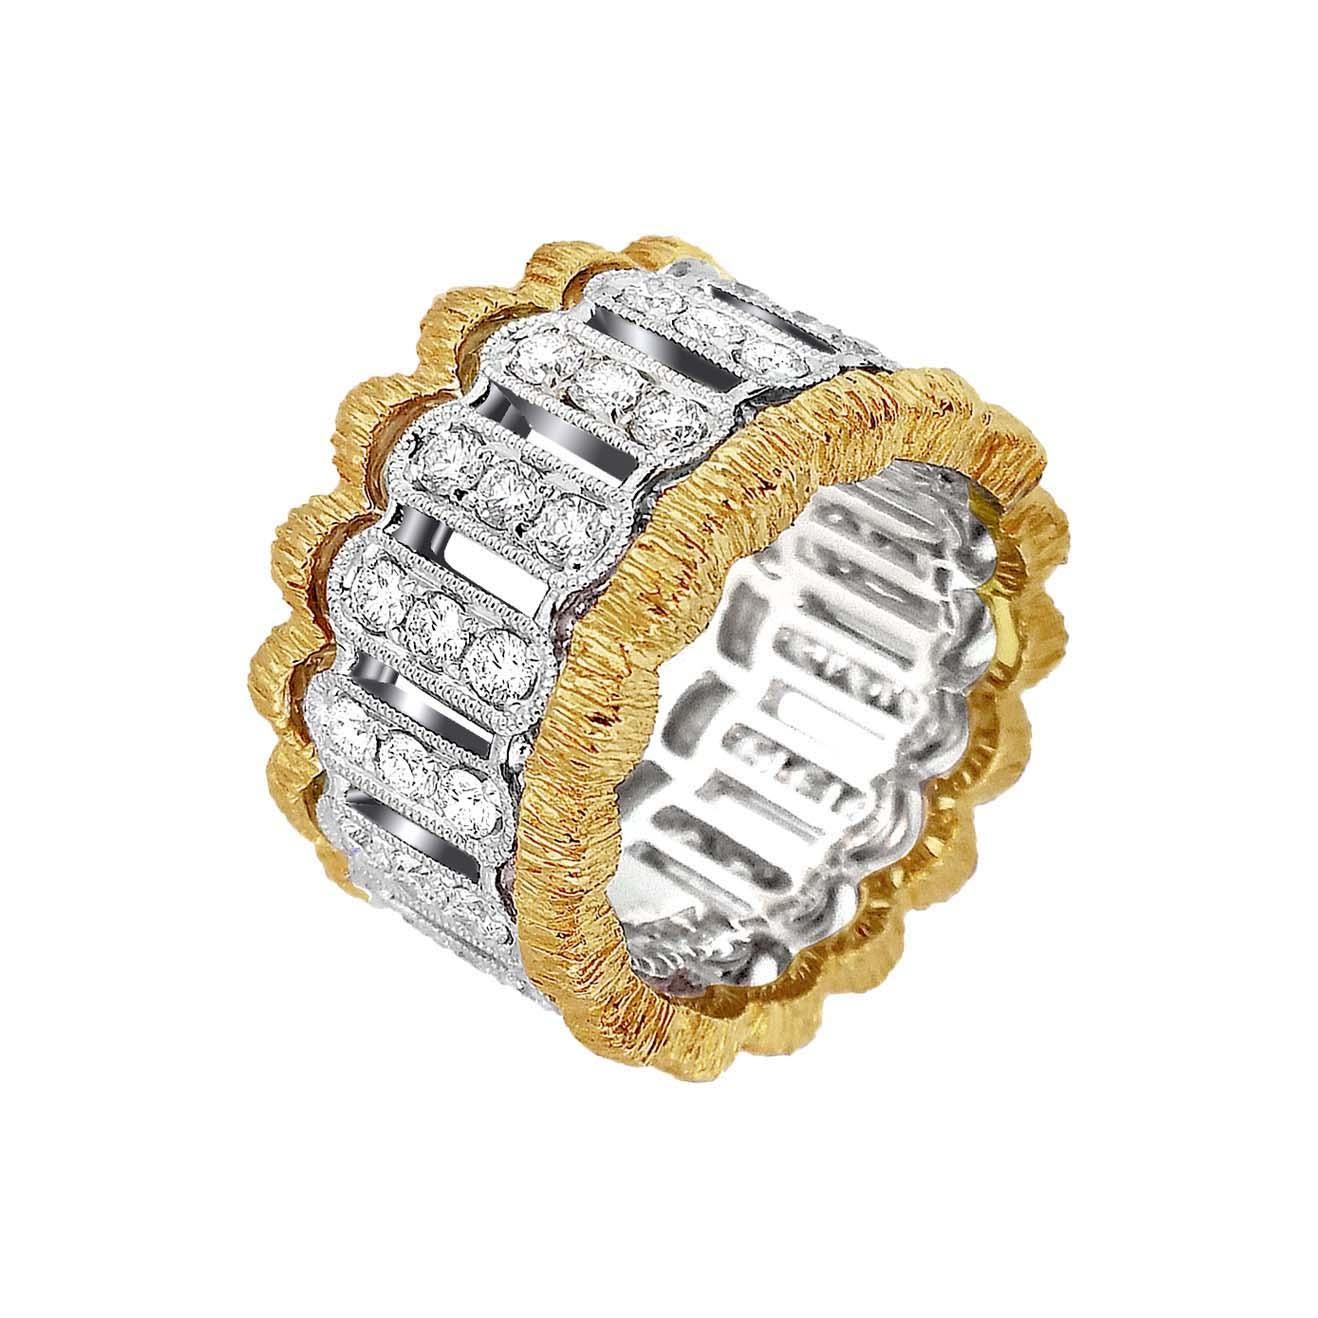 Produced by award winning Italian designer Stefano Vitolo. Stefano creates custom artisanal one of a kind jewelry with excellent gemstones in a truly old world Italian craftmanship.
This handcrafted ring has 1.34 total carat weight of F/G color and